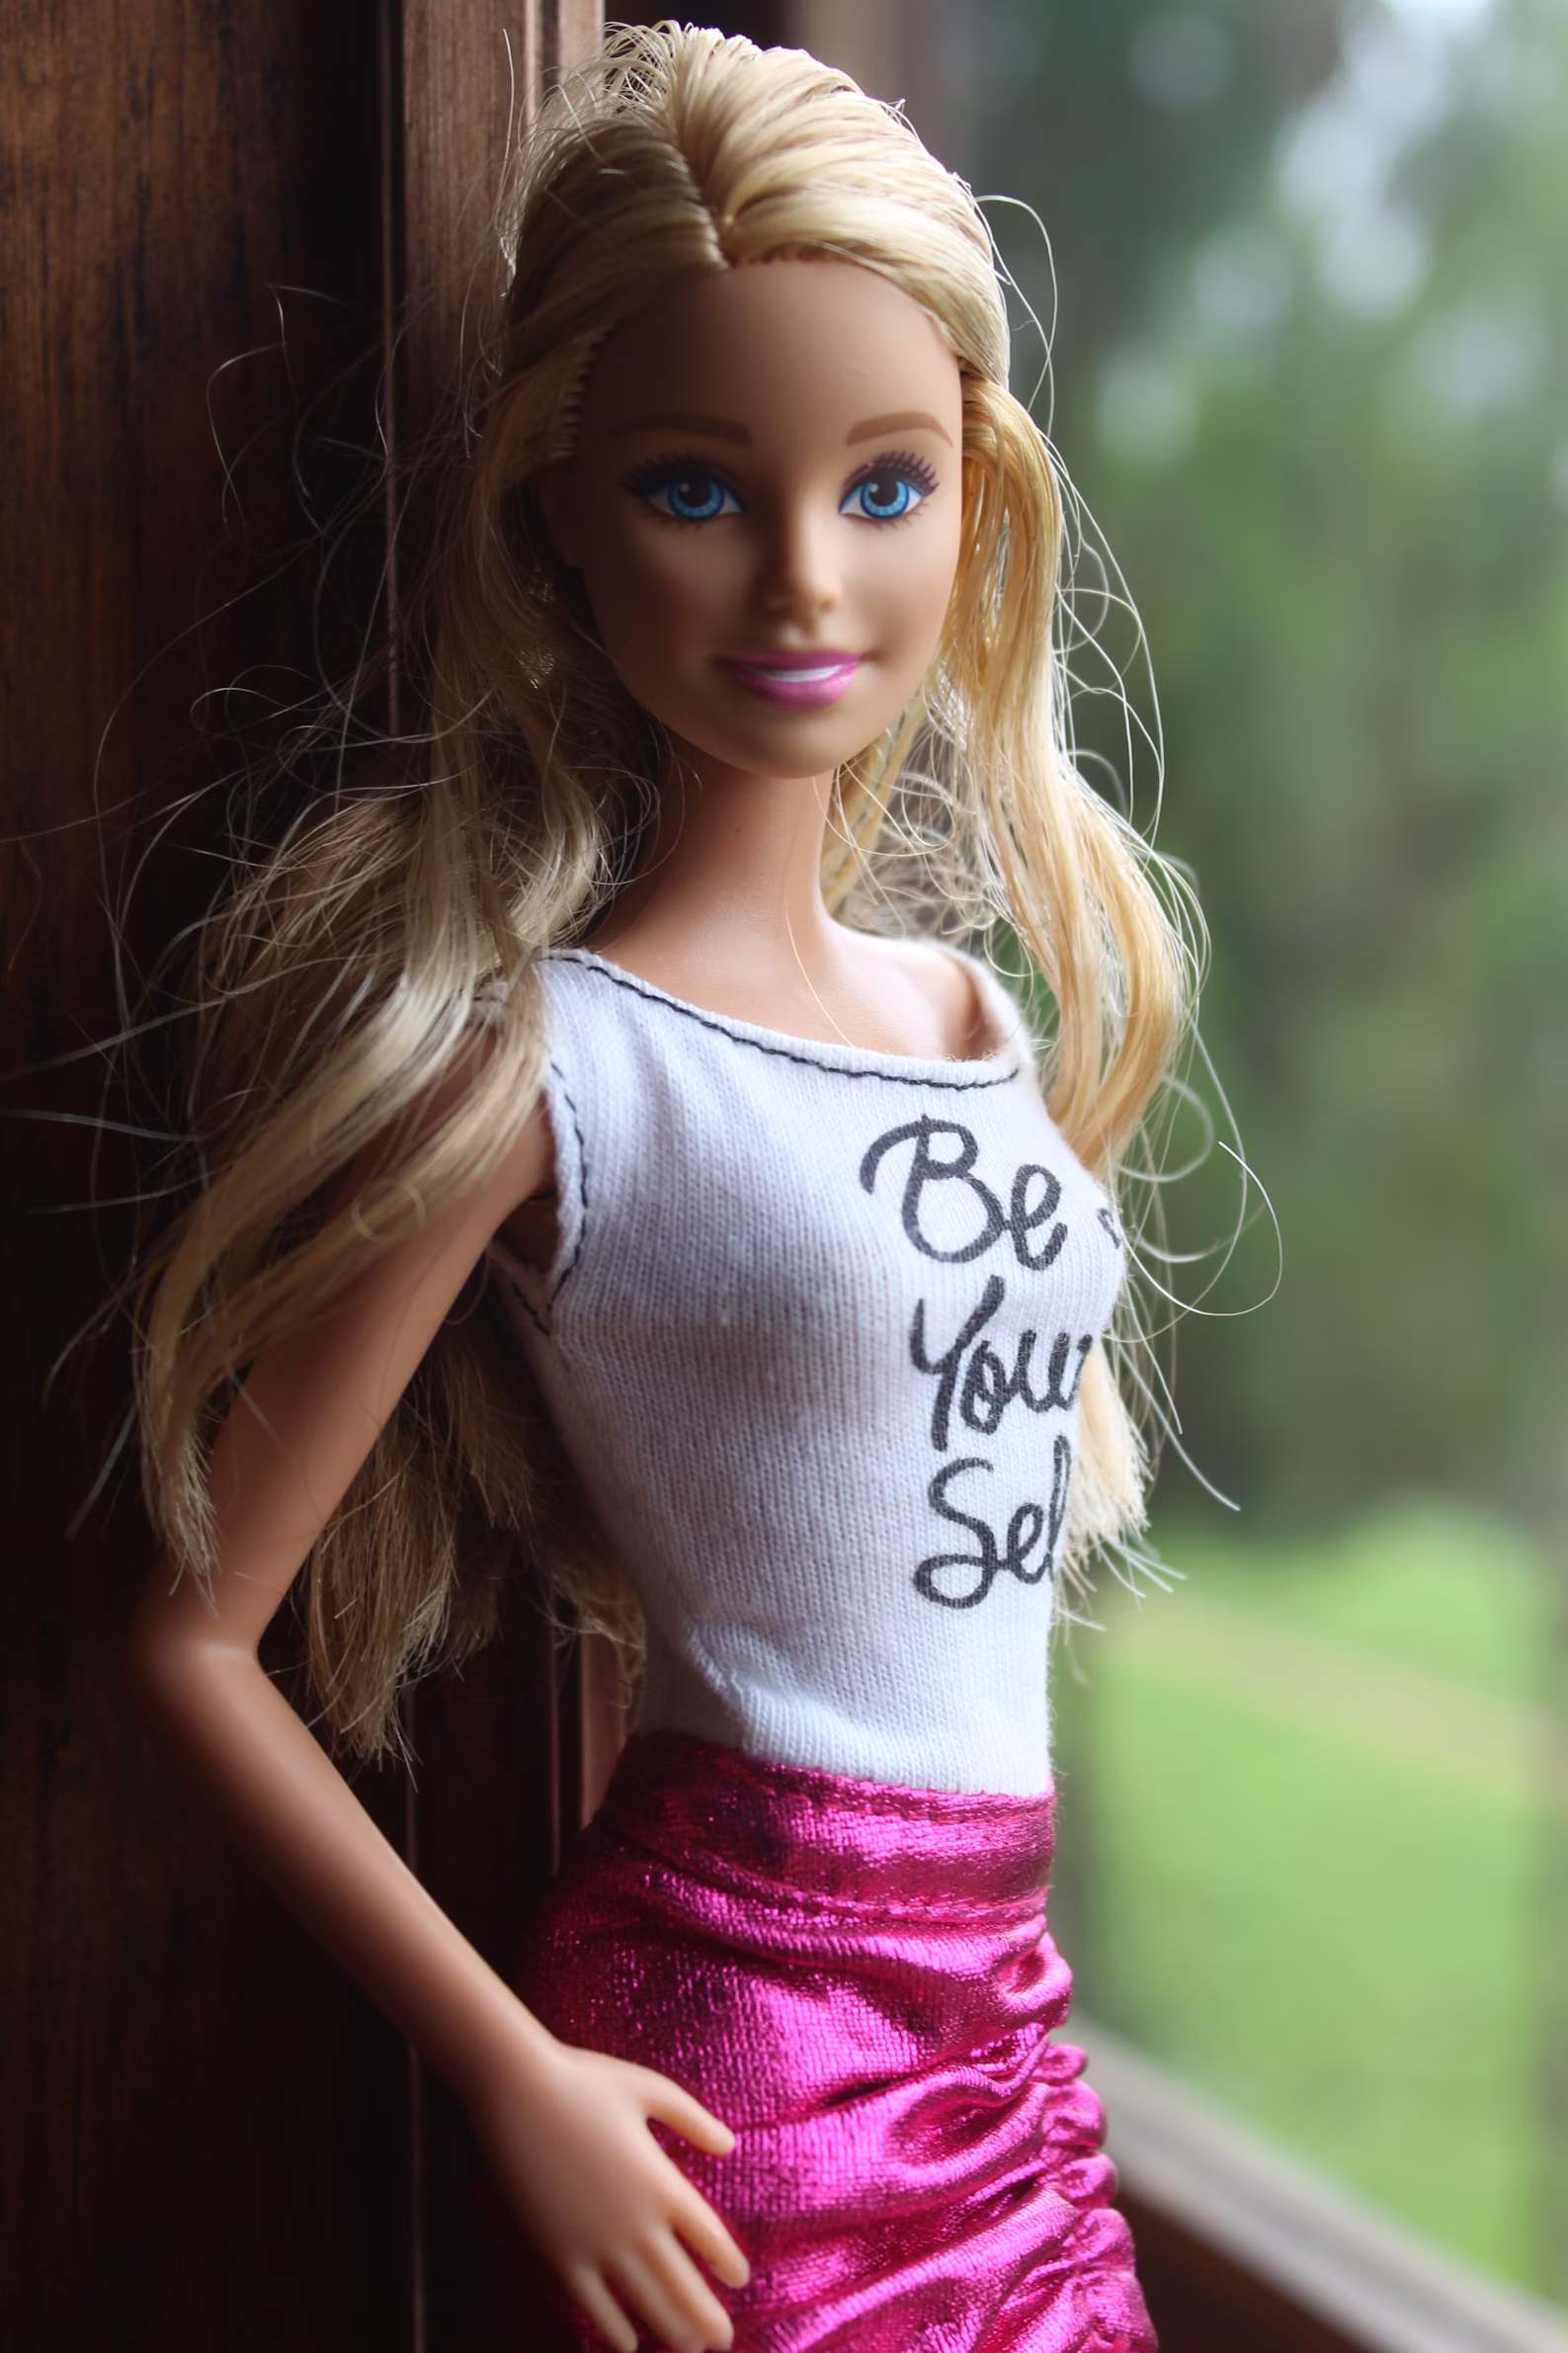 Blonde haired barbie doll photo